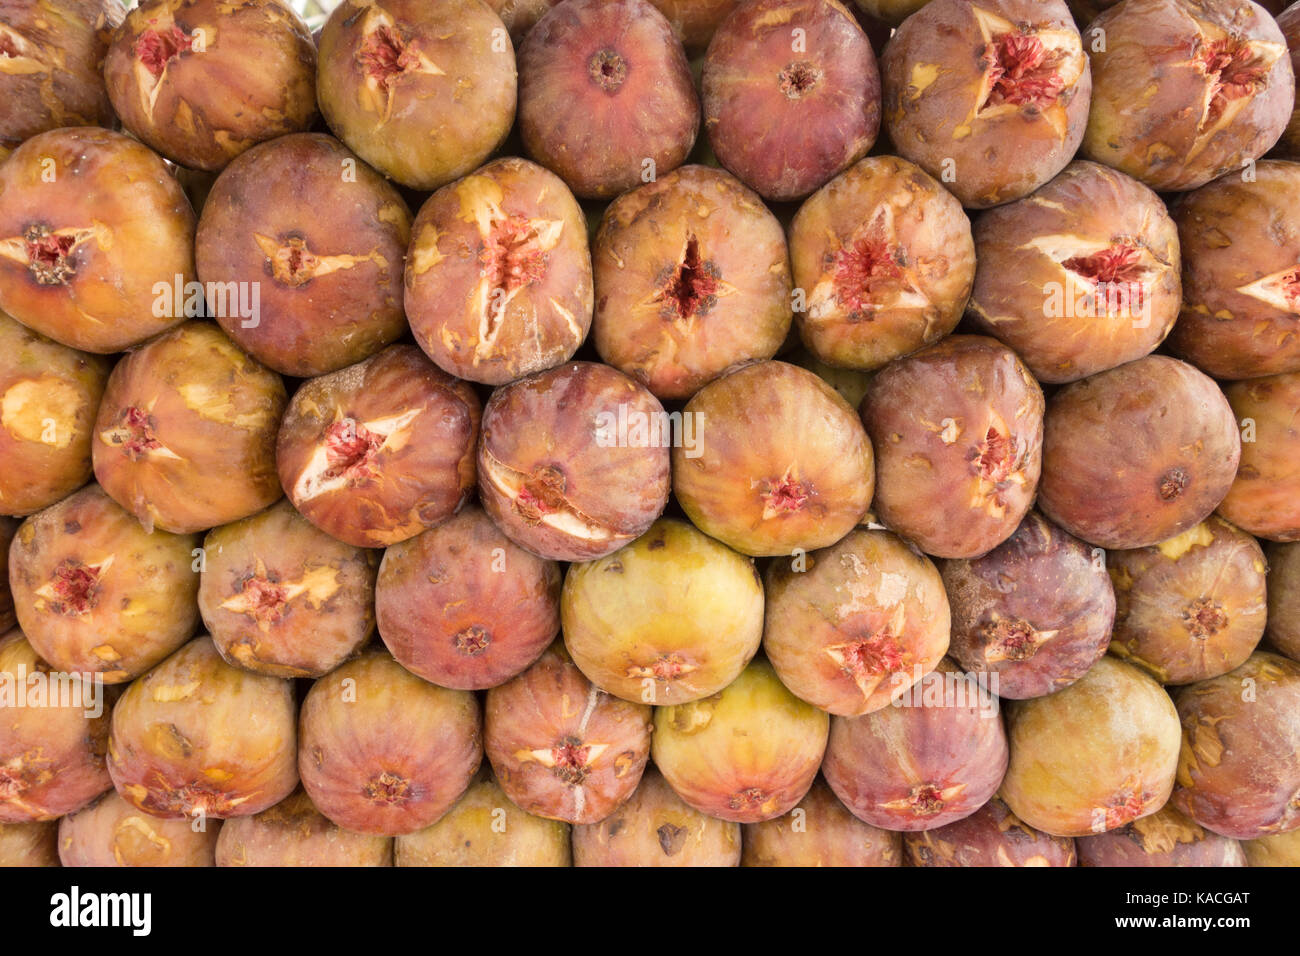 HYDERABAD,INDIA-25th SEPTEMBER,2017.Common Figs neatly arranged in layers for Sale by a street fruit vendor in Hyderabad,India Stock Photo